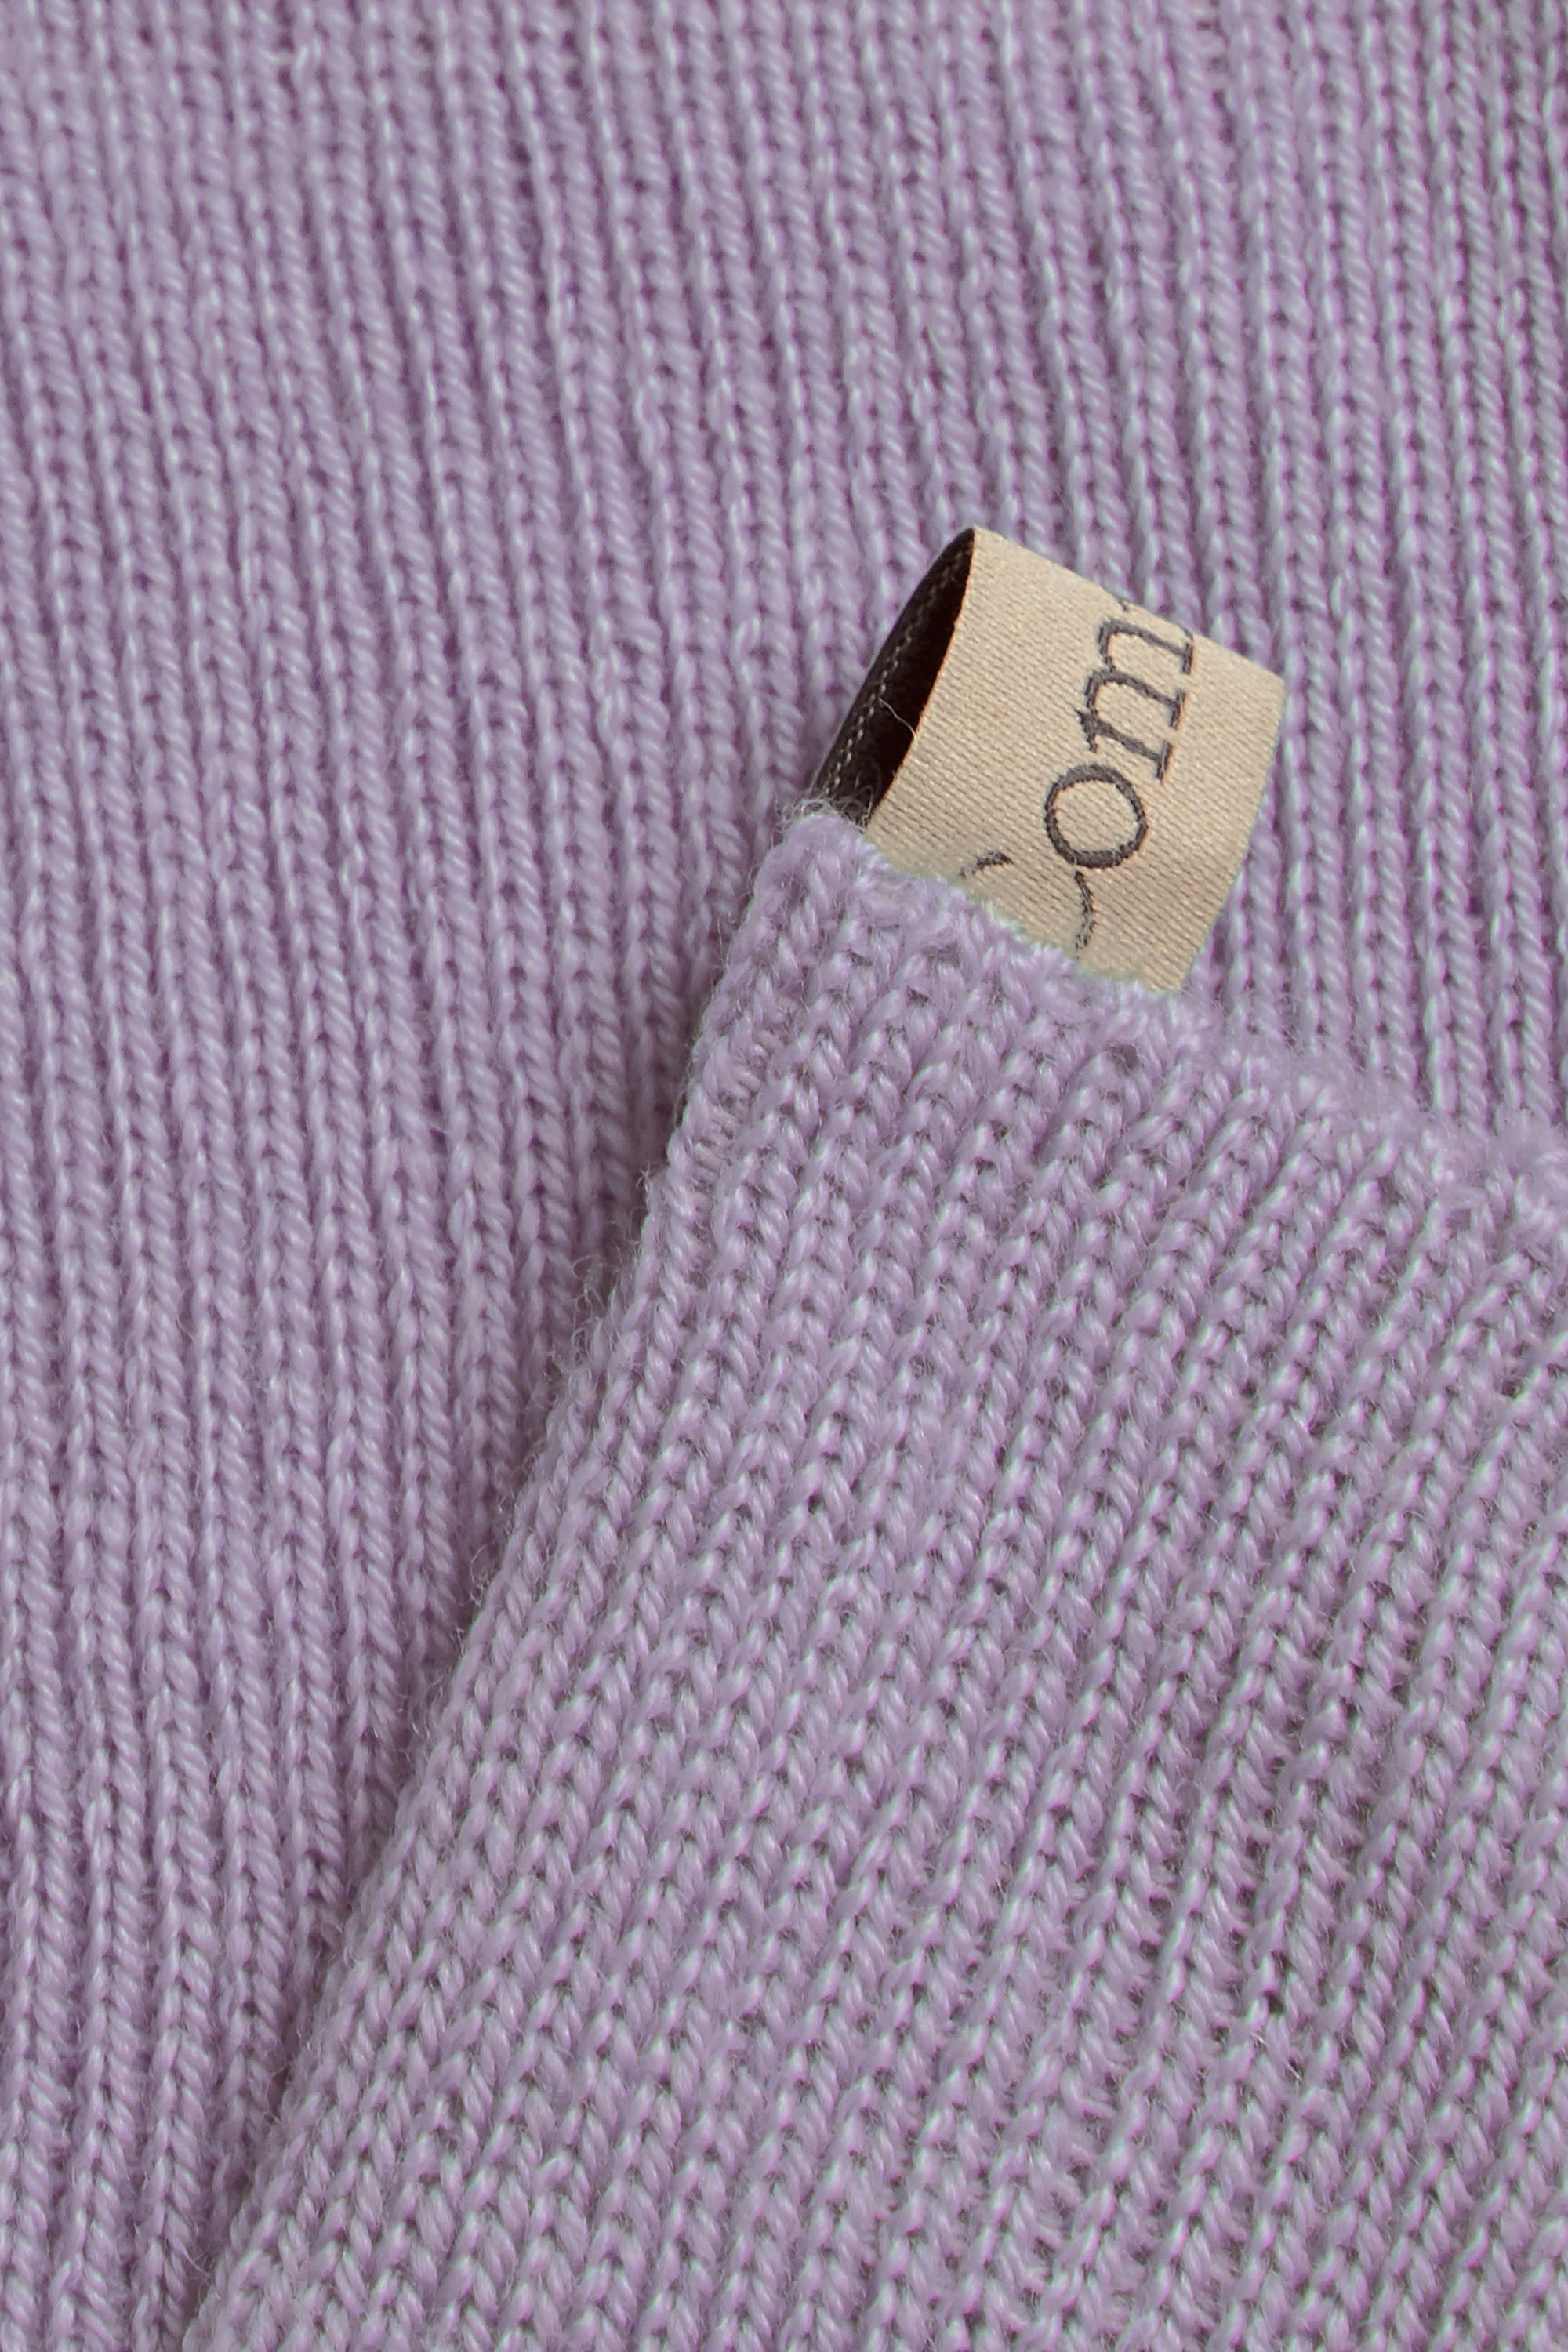 Ribbon tag cuff detail, The Merino Sock in Lilac, made with merino wool